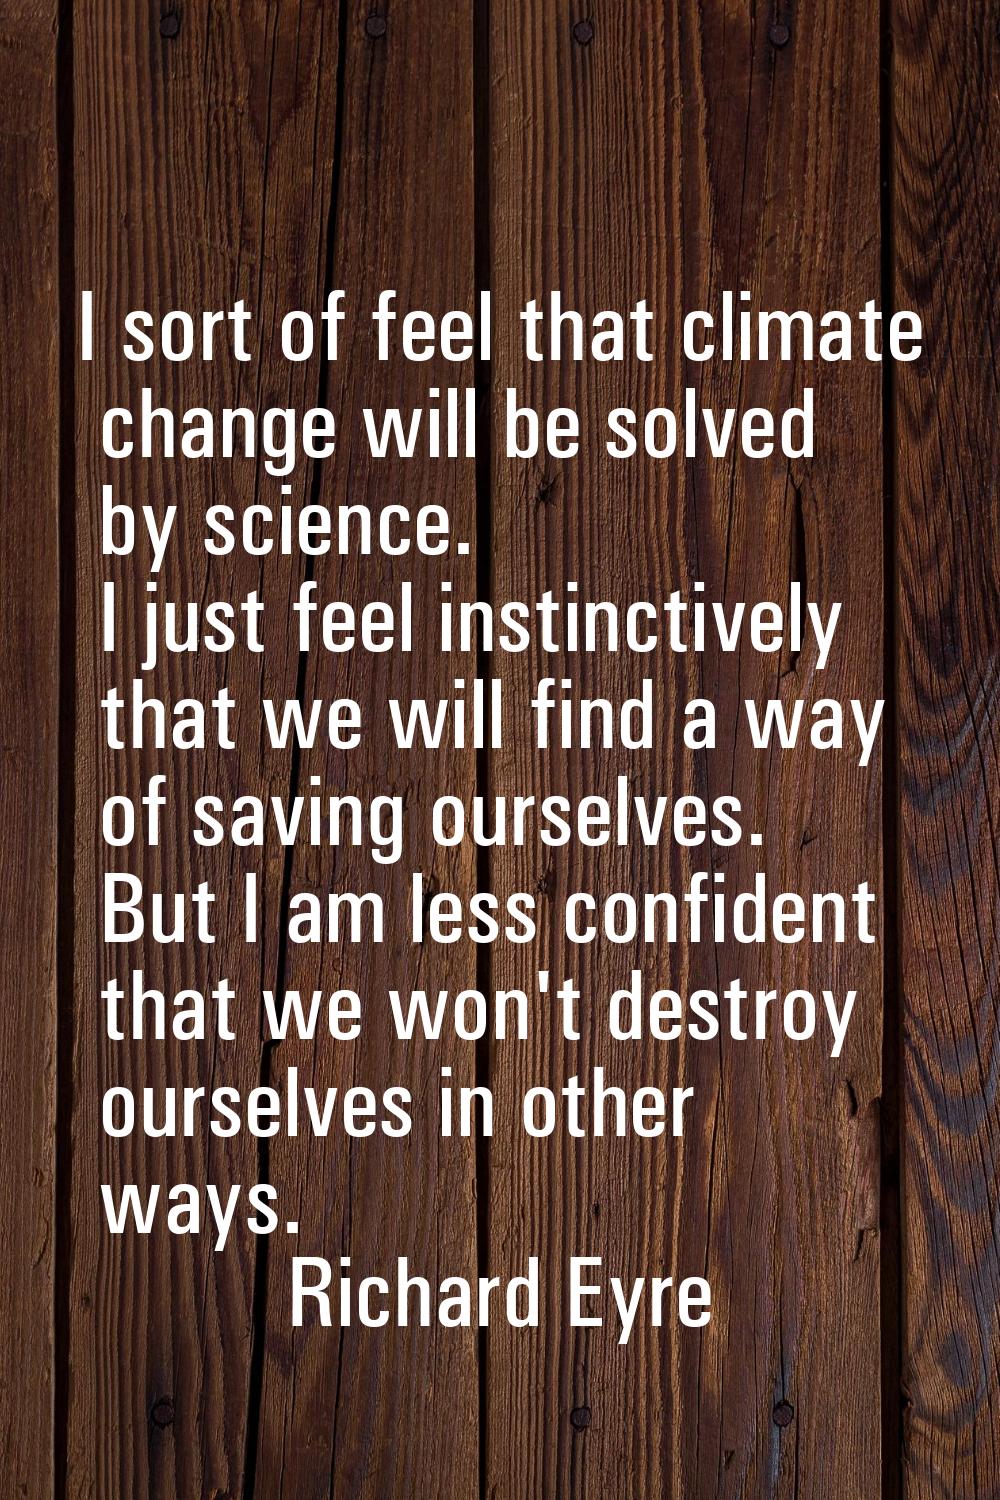 I sort of feel that climate change will be solved by science. I just feel instinctively that we wil